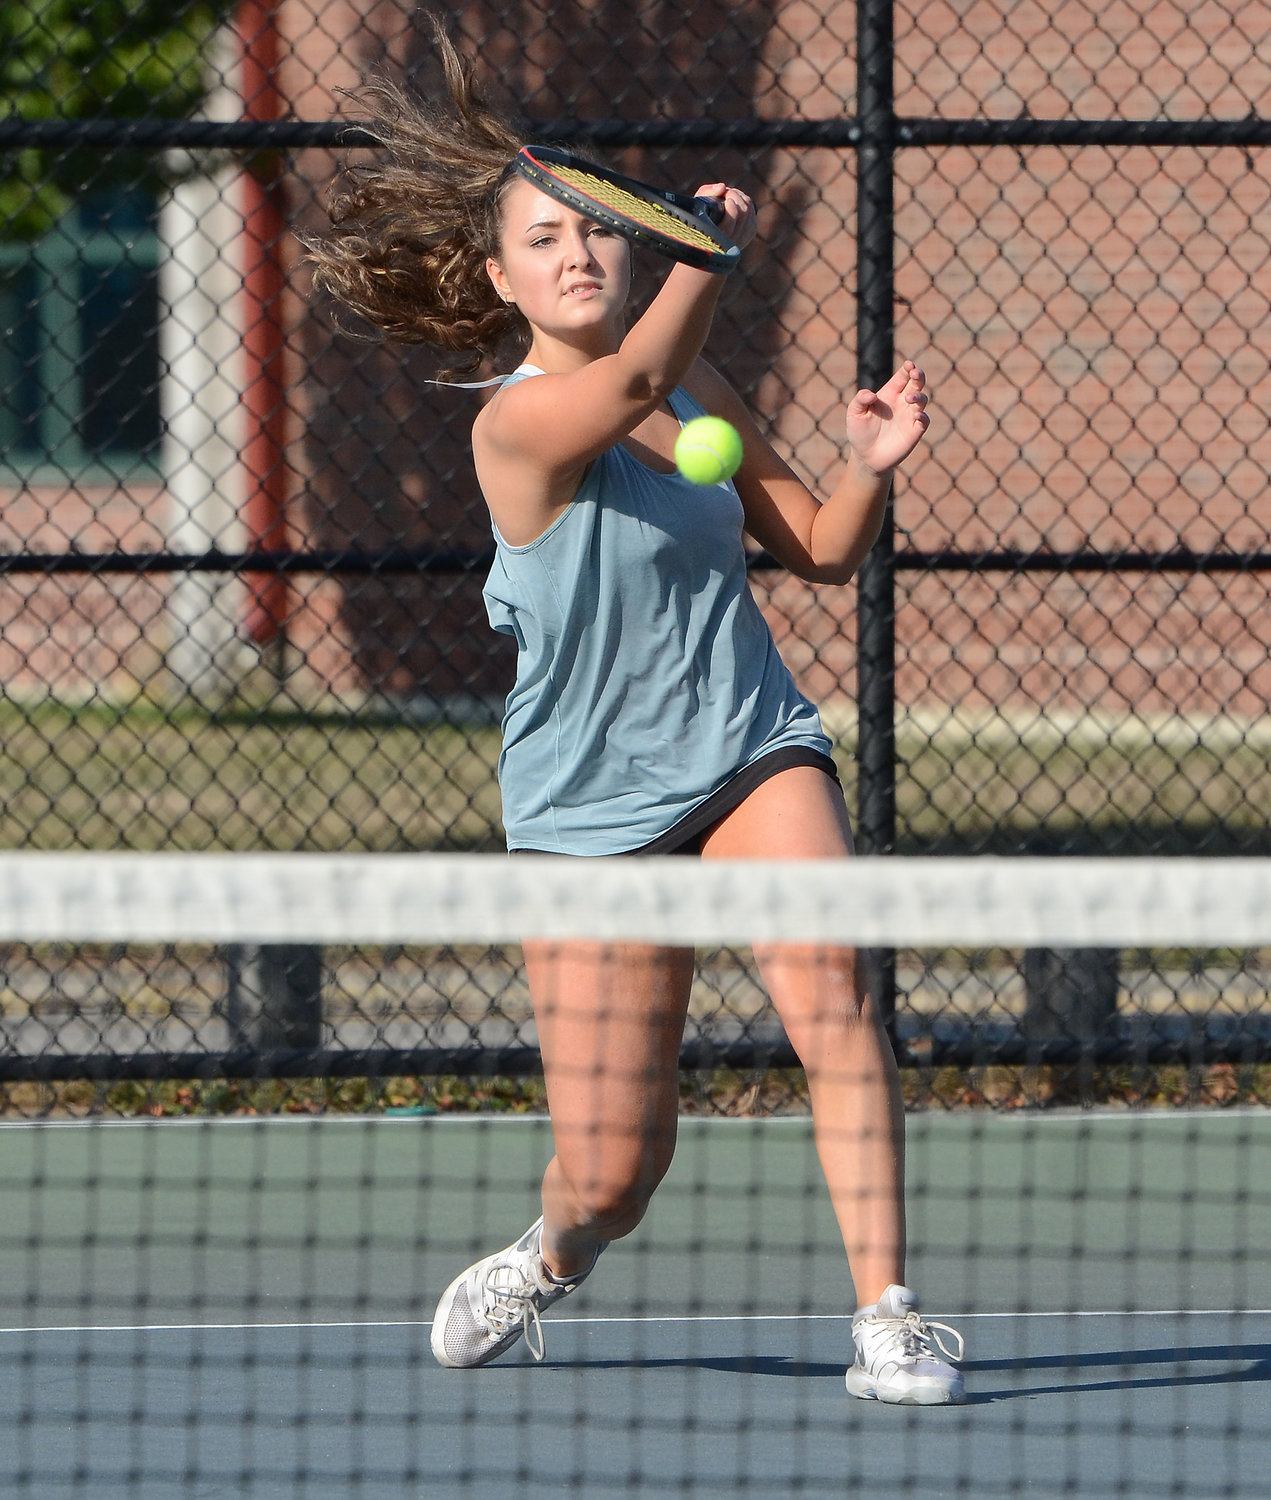 Barrington High School's Leila Beers hits a shot during a match against her teammate, Sage Wells, during practice on Monday, Sept. 21.